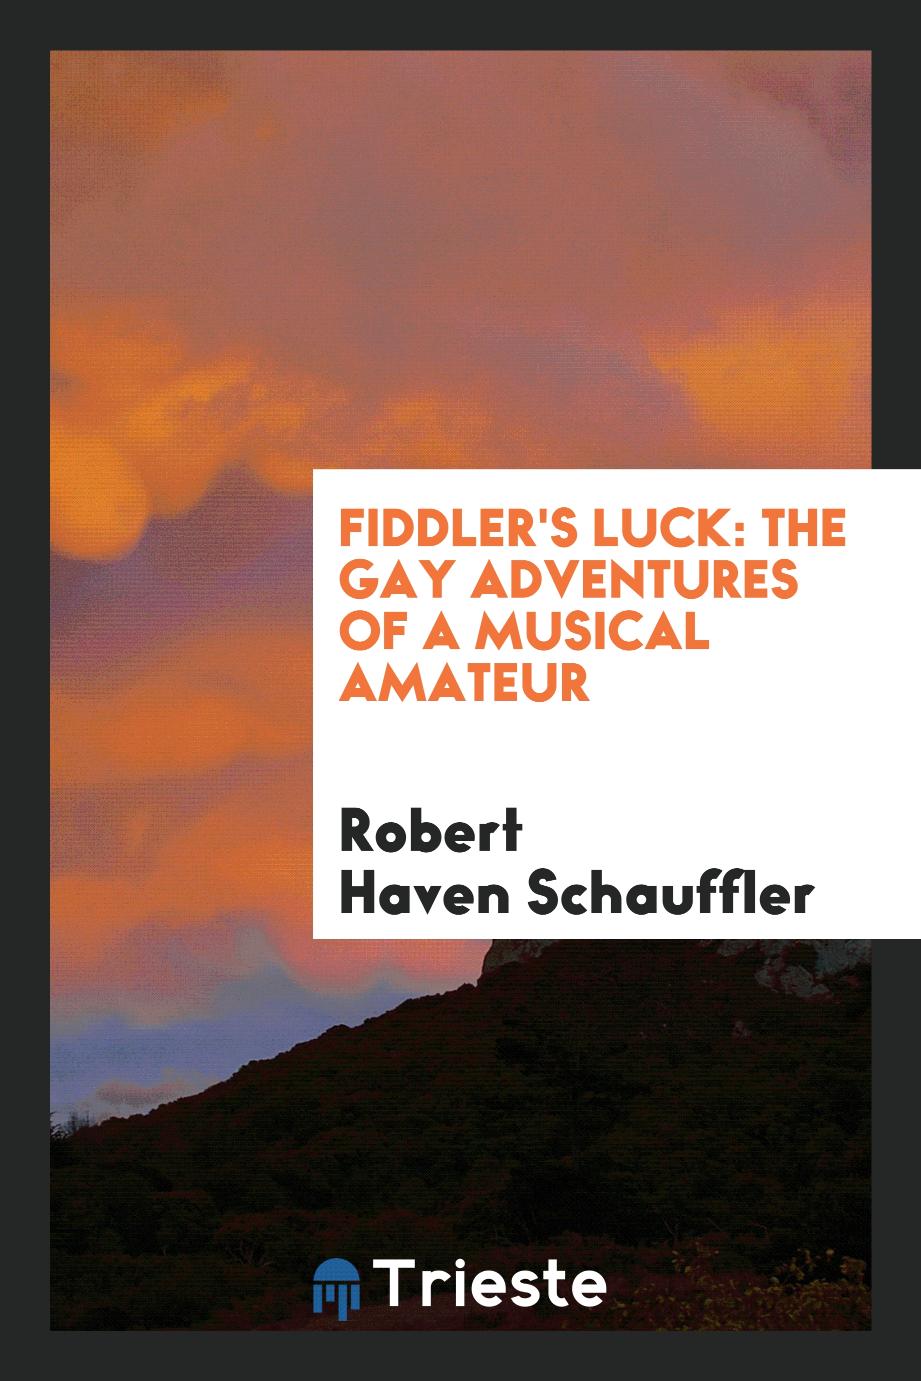 Fiddler's luck: the gay adventures of a musical amateur